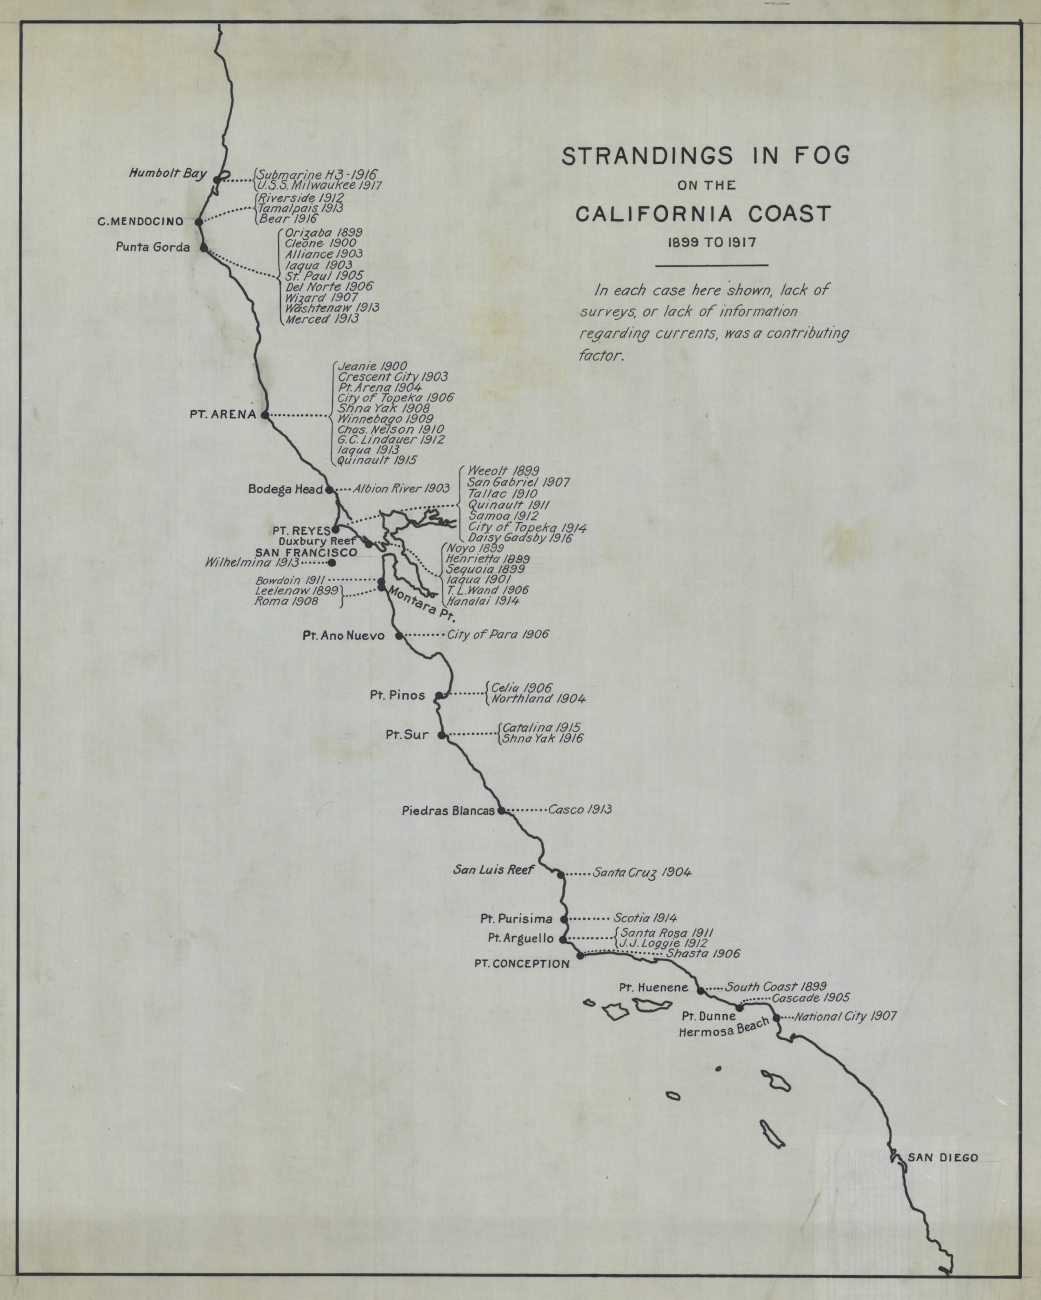 Chart of strandings in fog on the California Coast from 1899 to 1917